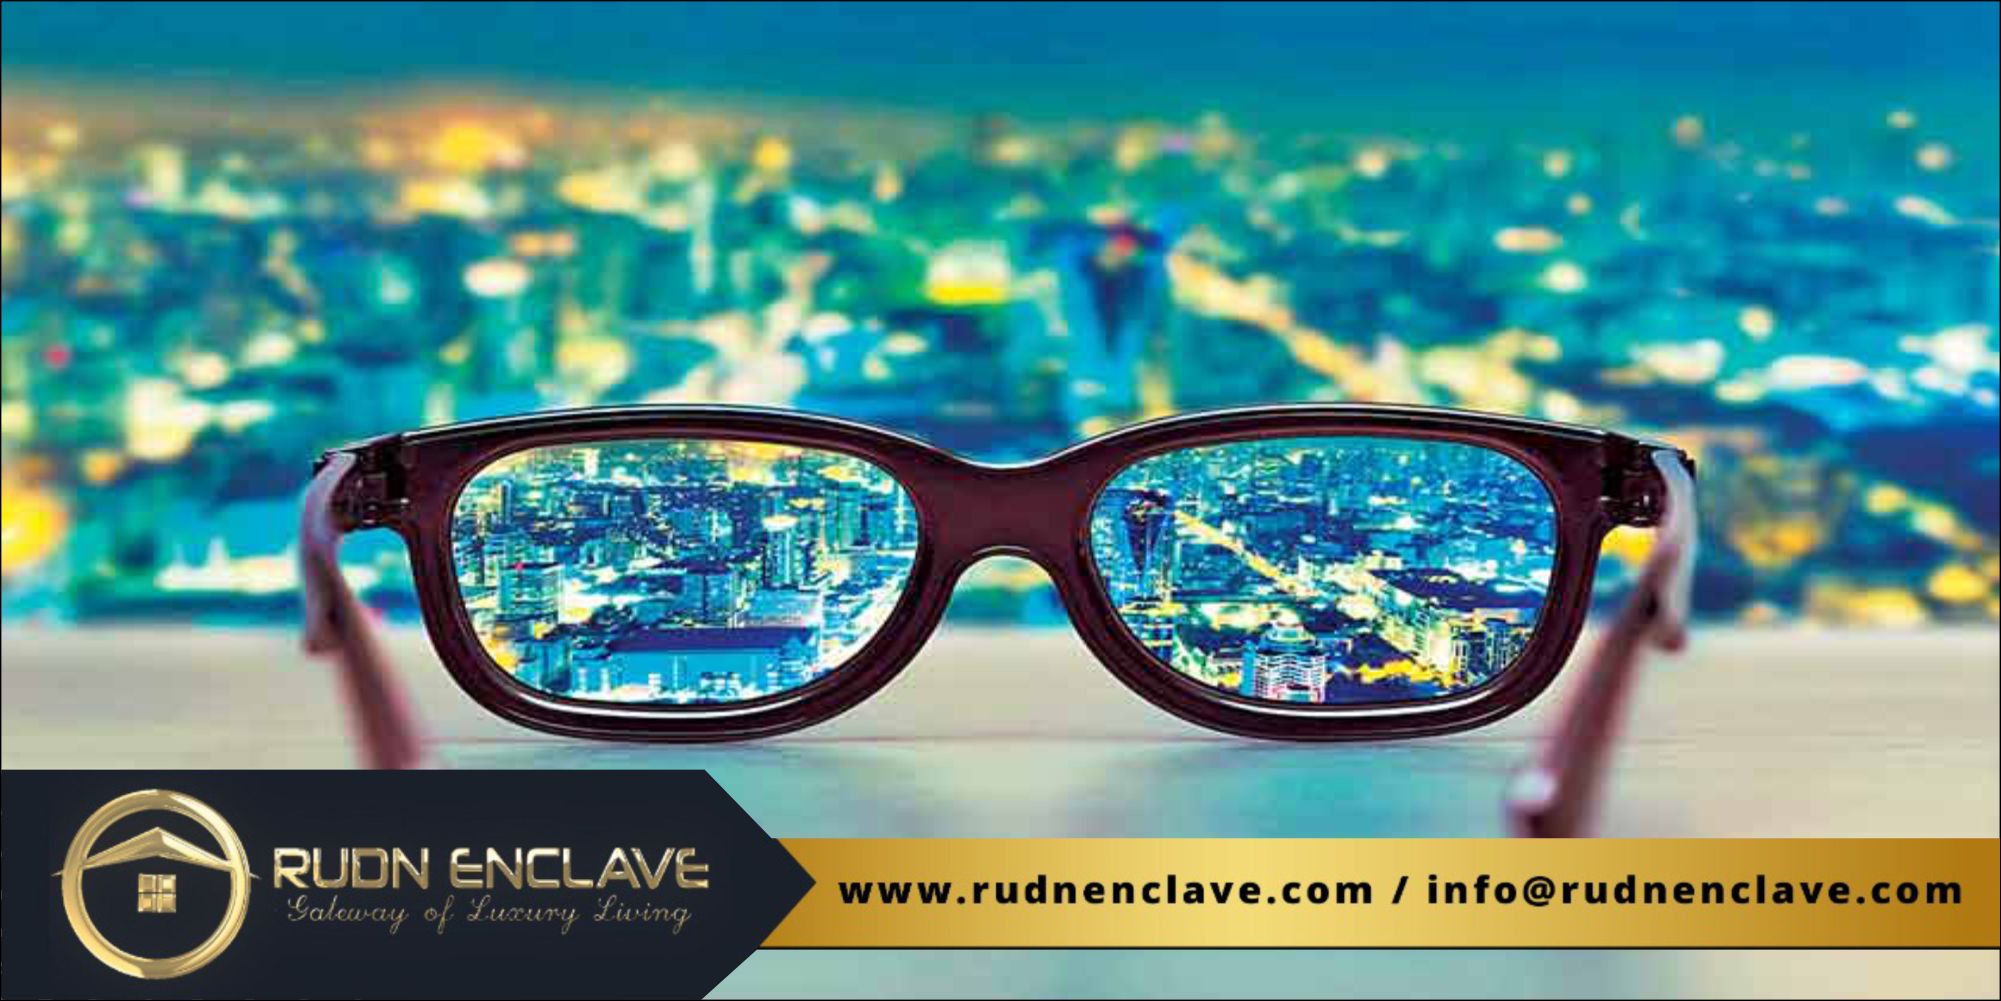 RUDN Enclave Vision Image in Information Sharing Policy